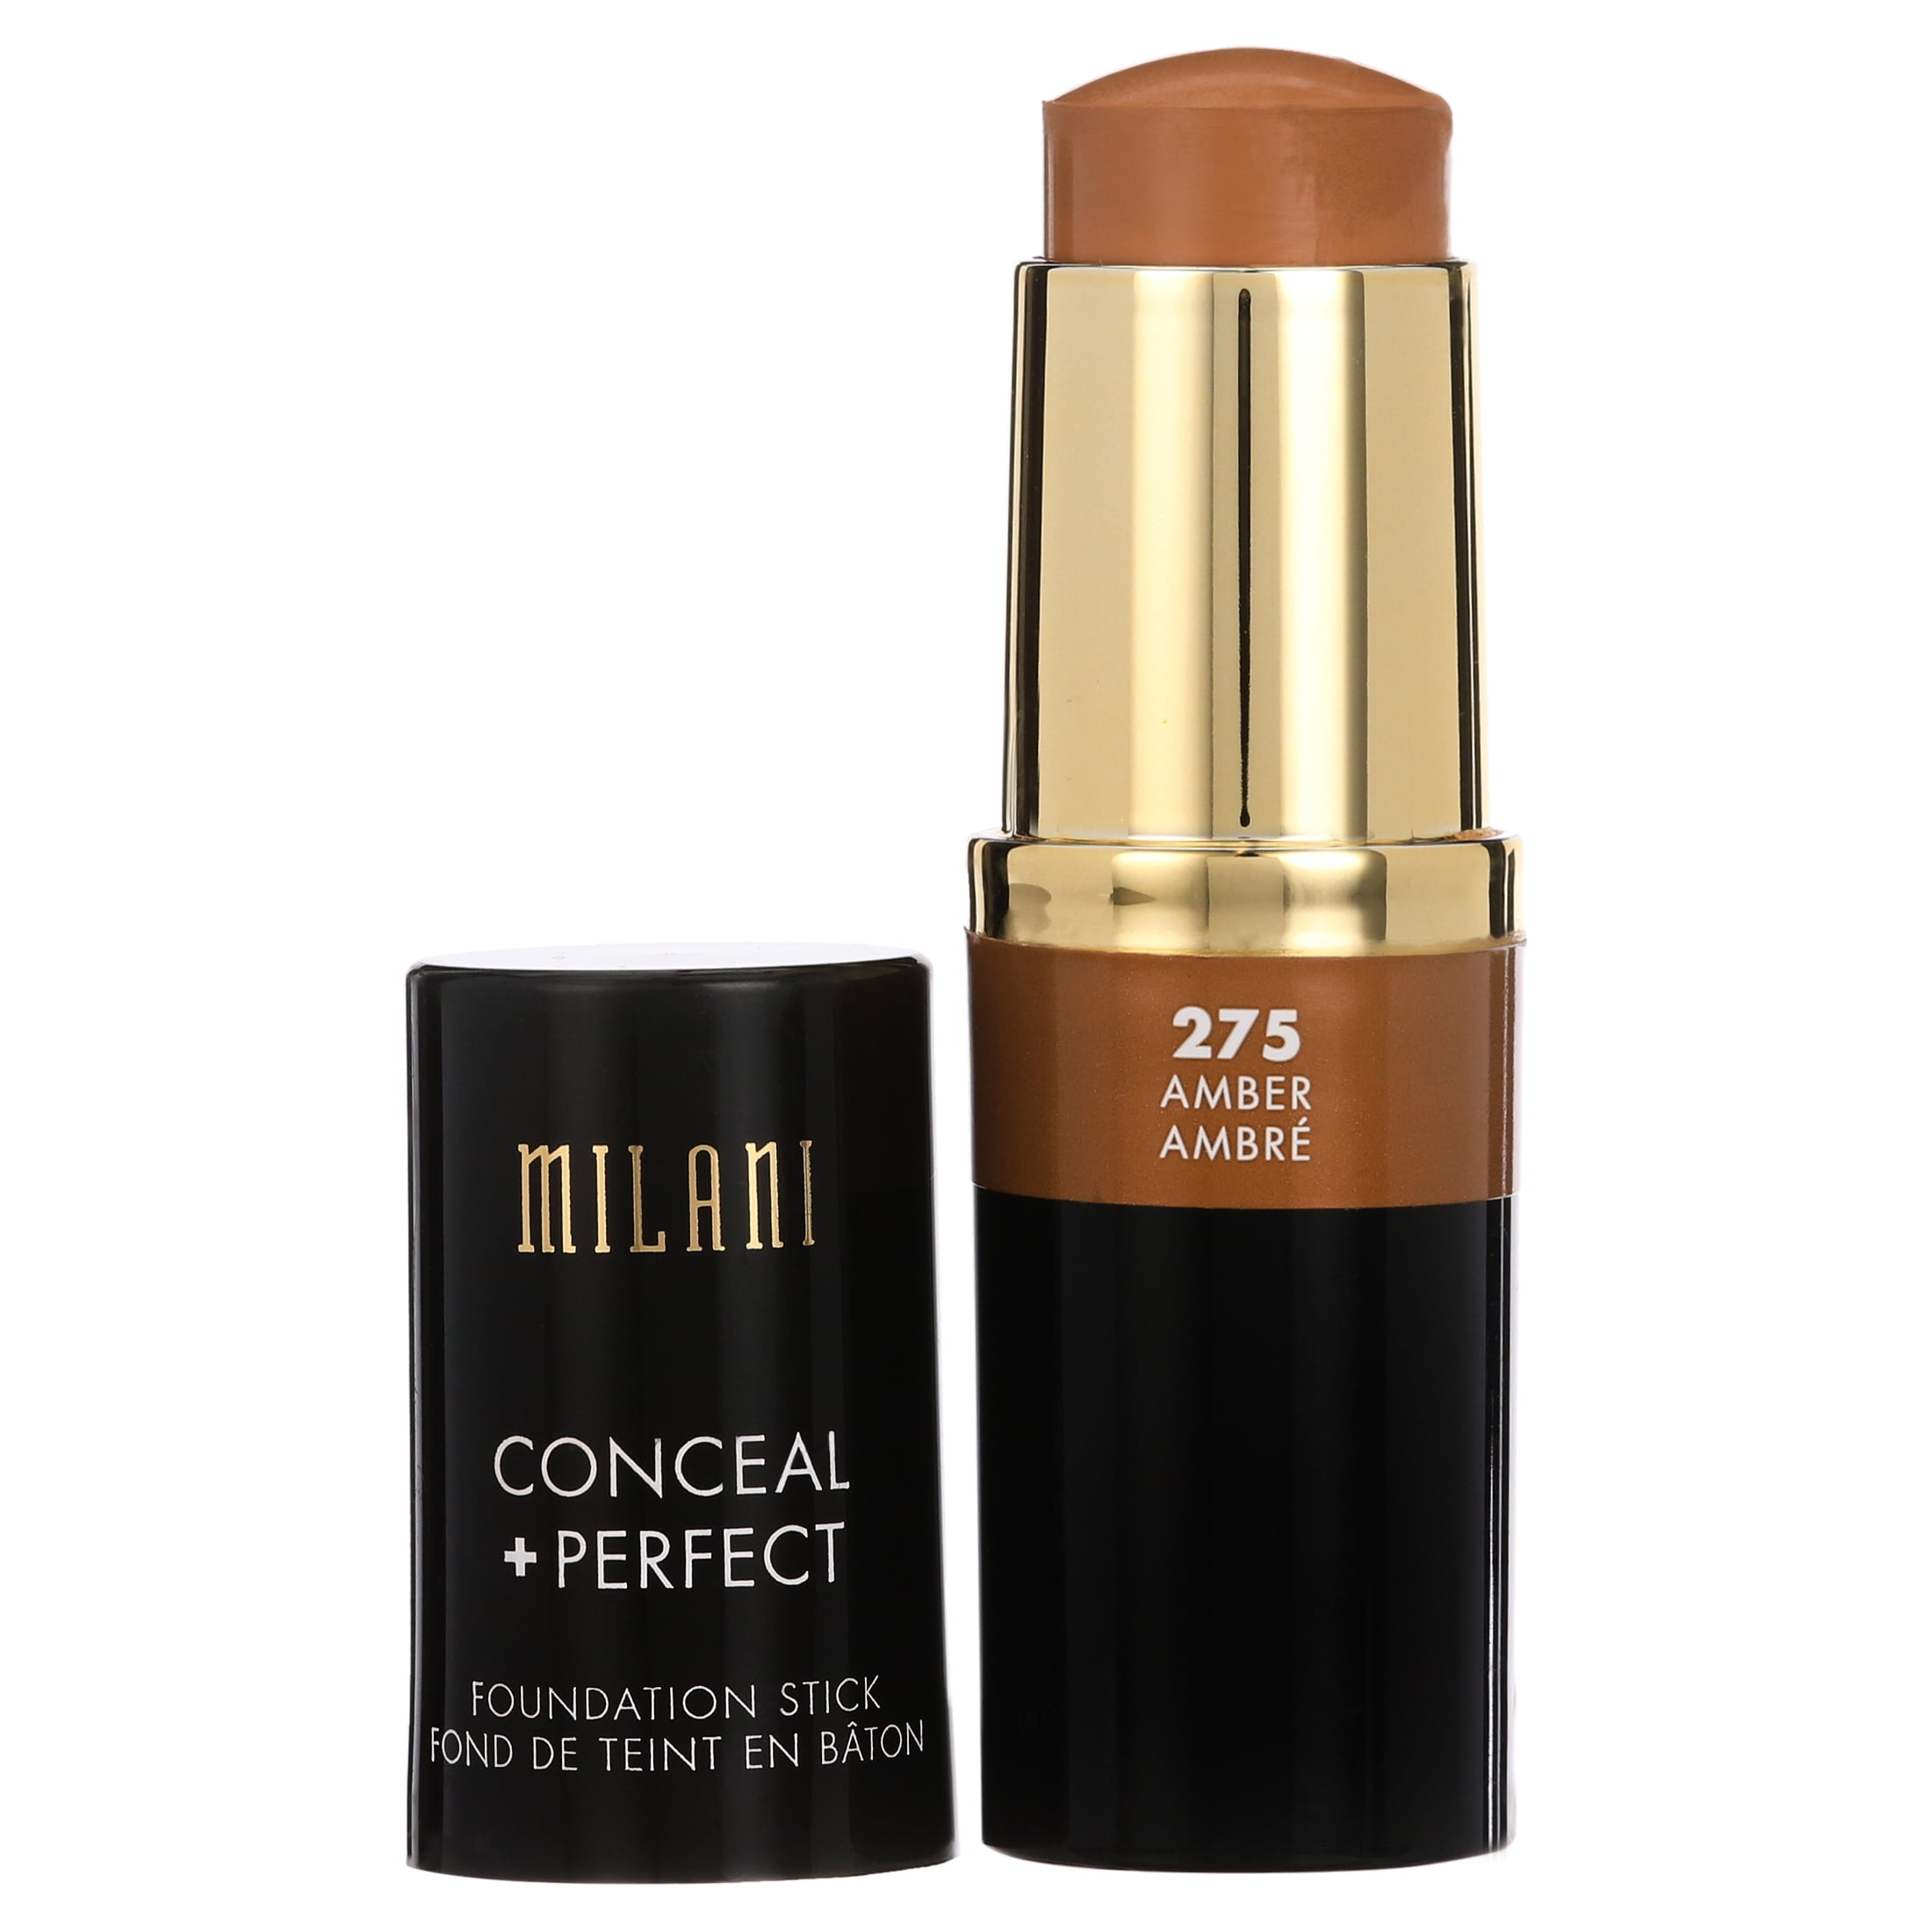 MILANI Conceal + Perfect Foundation Stick, Amber 